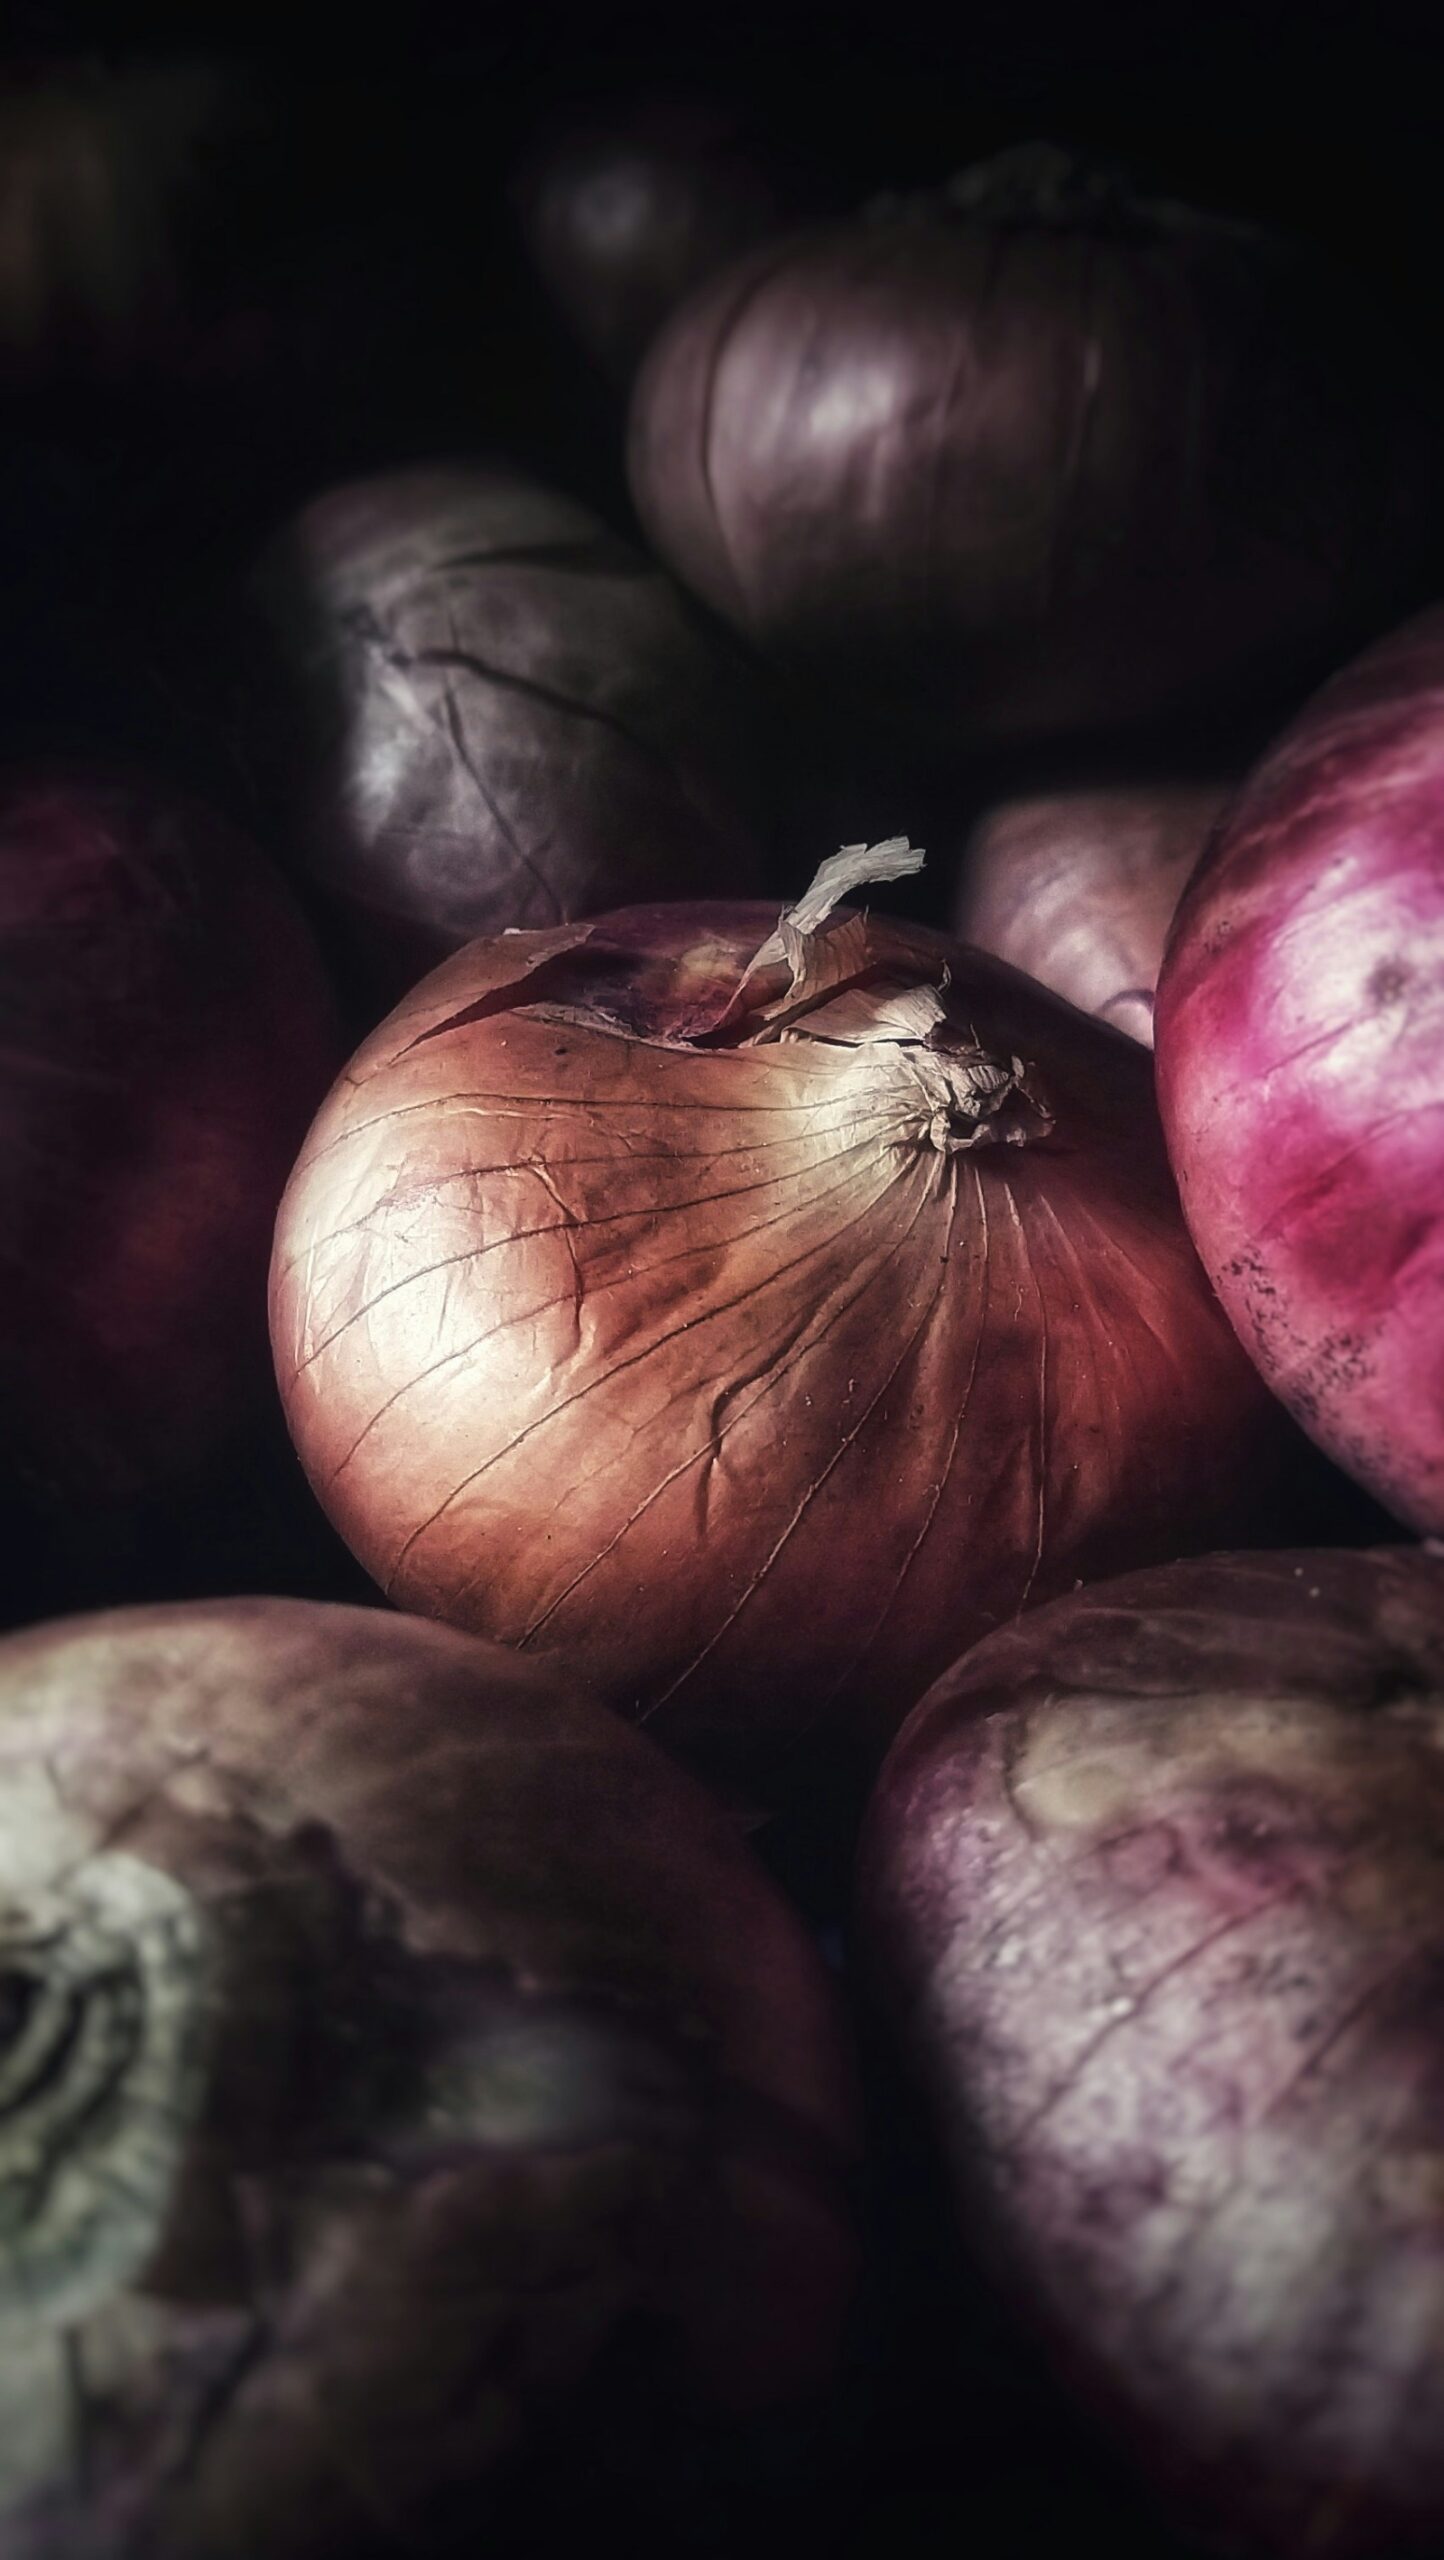 A variety of purple onions in a dark setting.